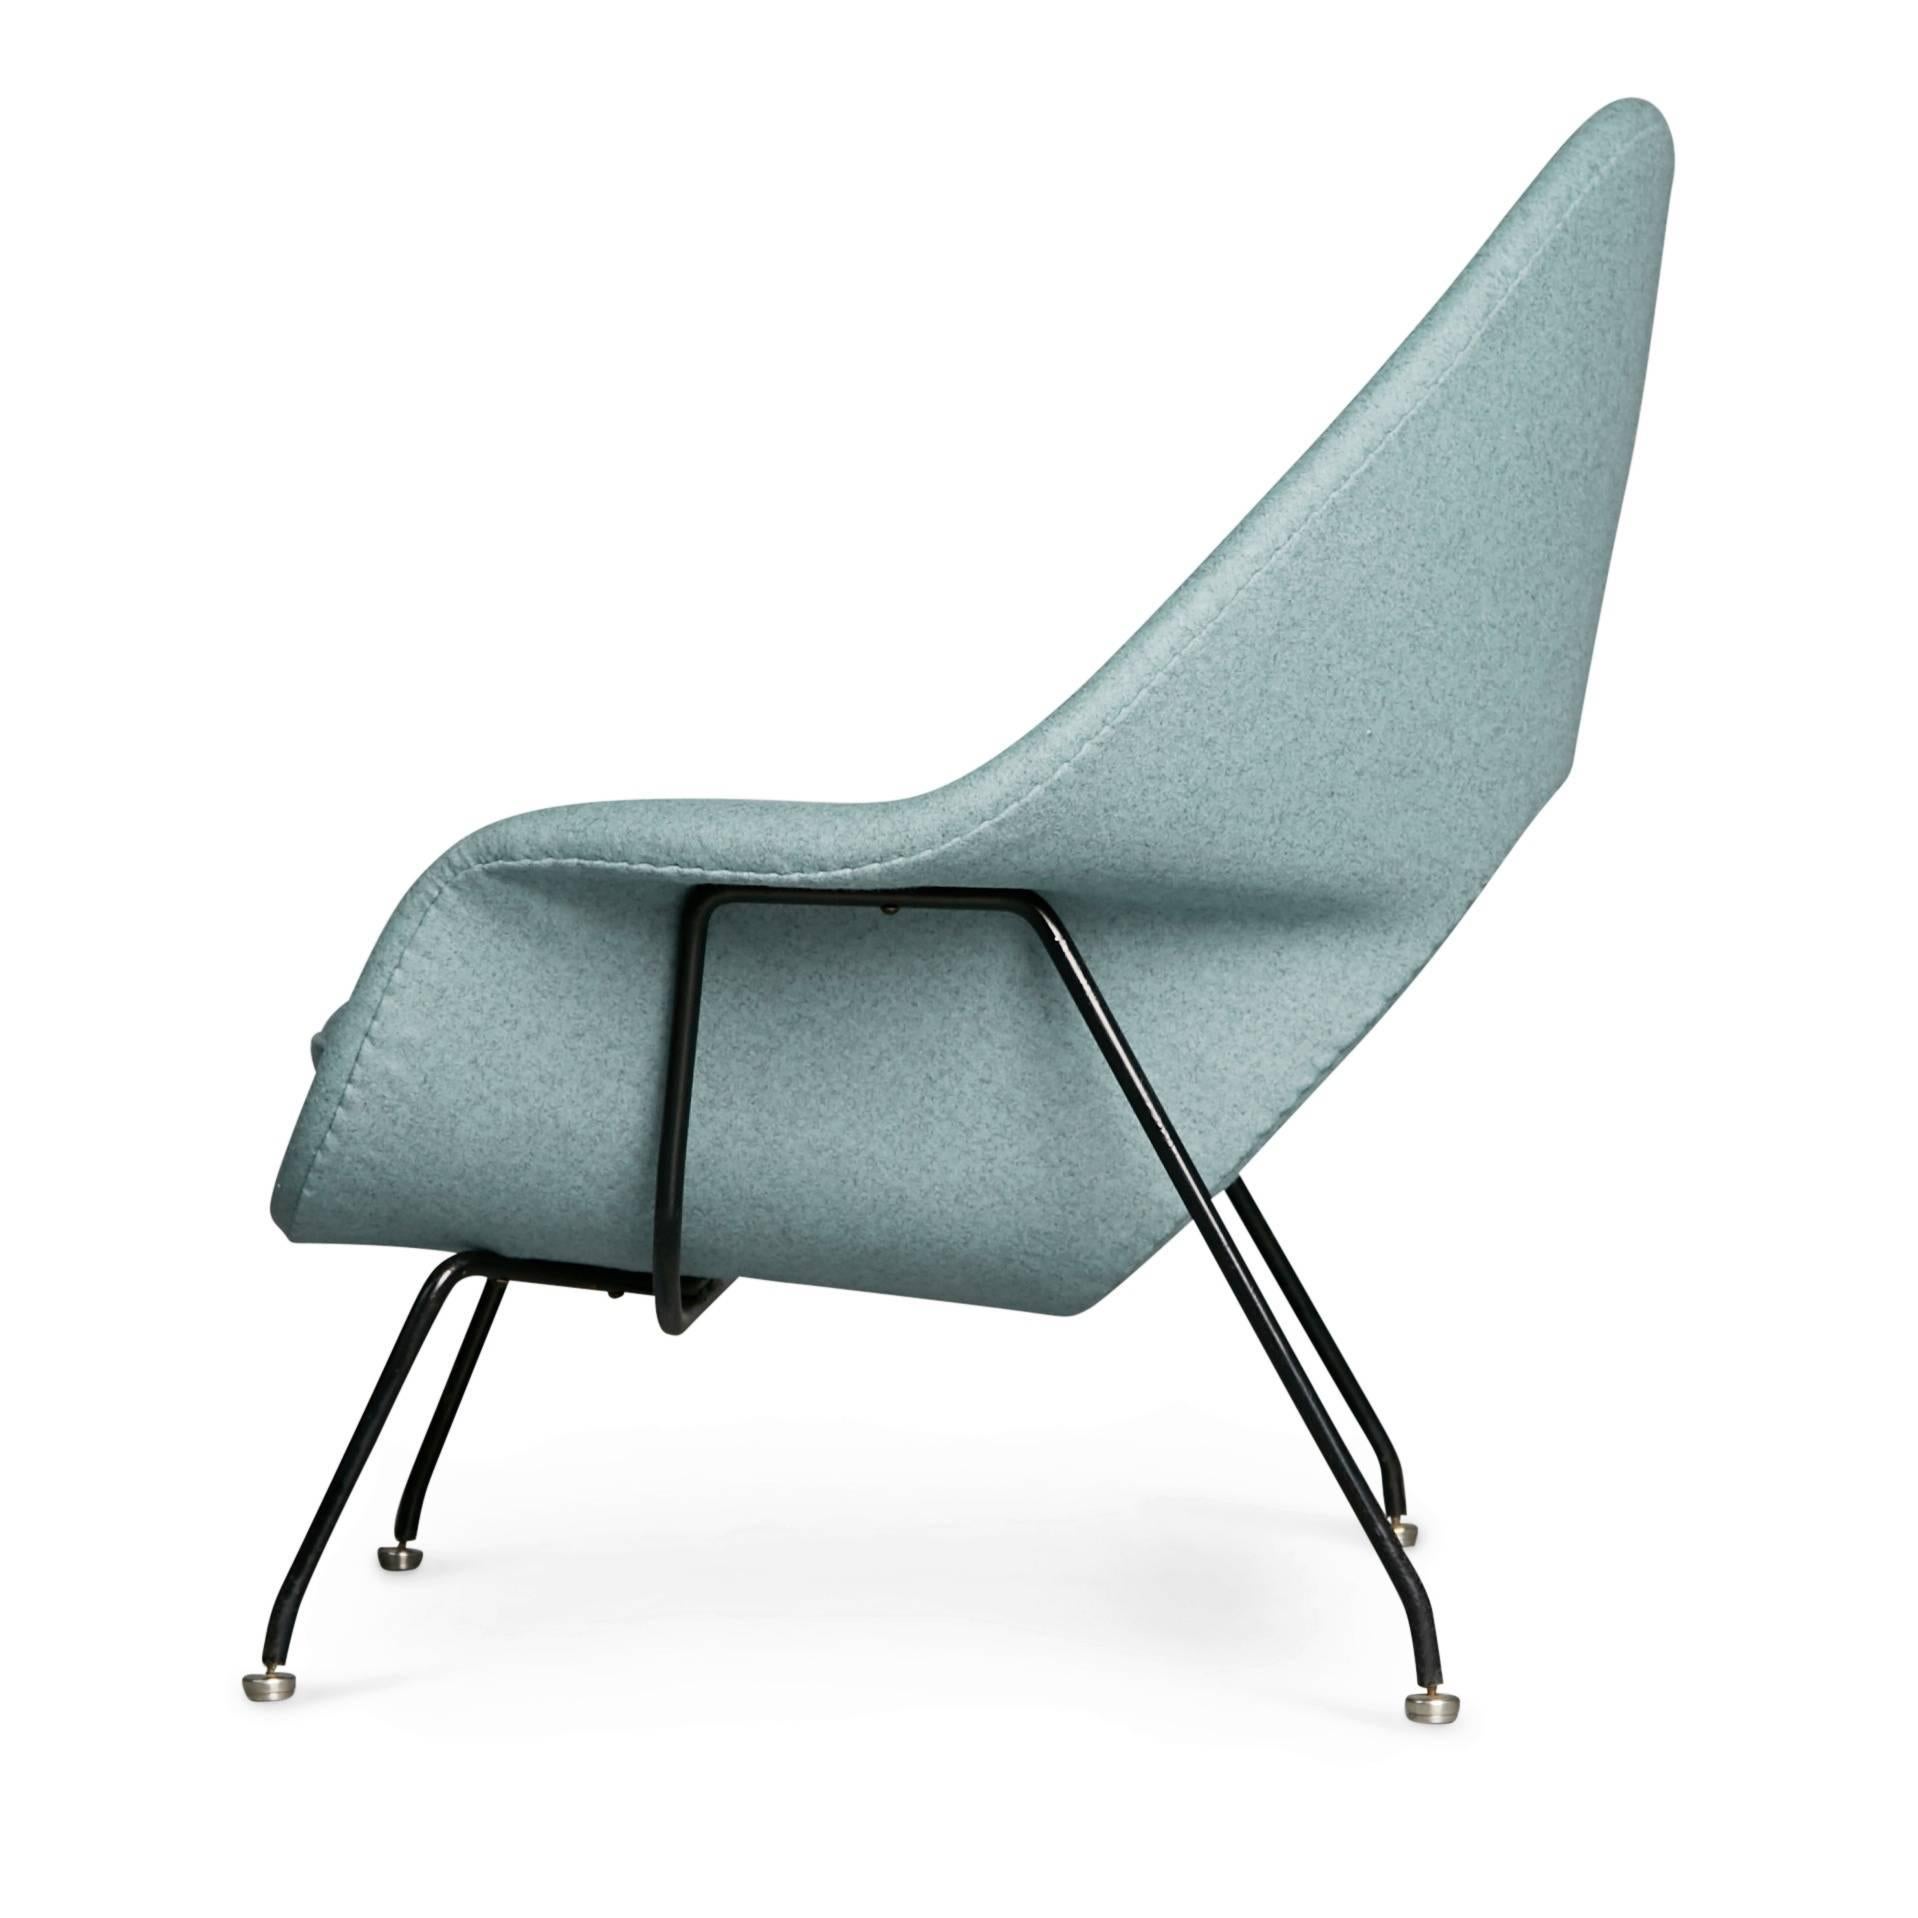 Mid-Century Modern Newly Upholstered Womb Chair by Eero Saarinen for Knoll, circa 1950